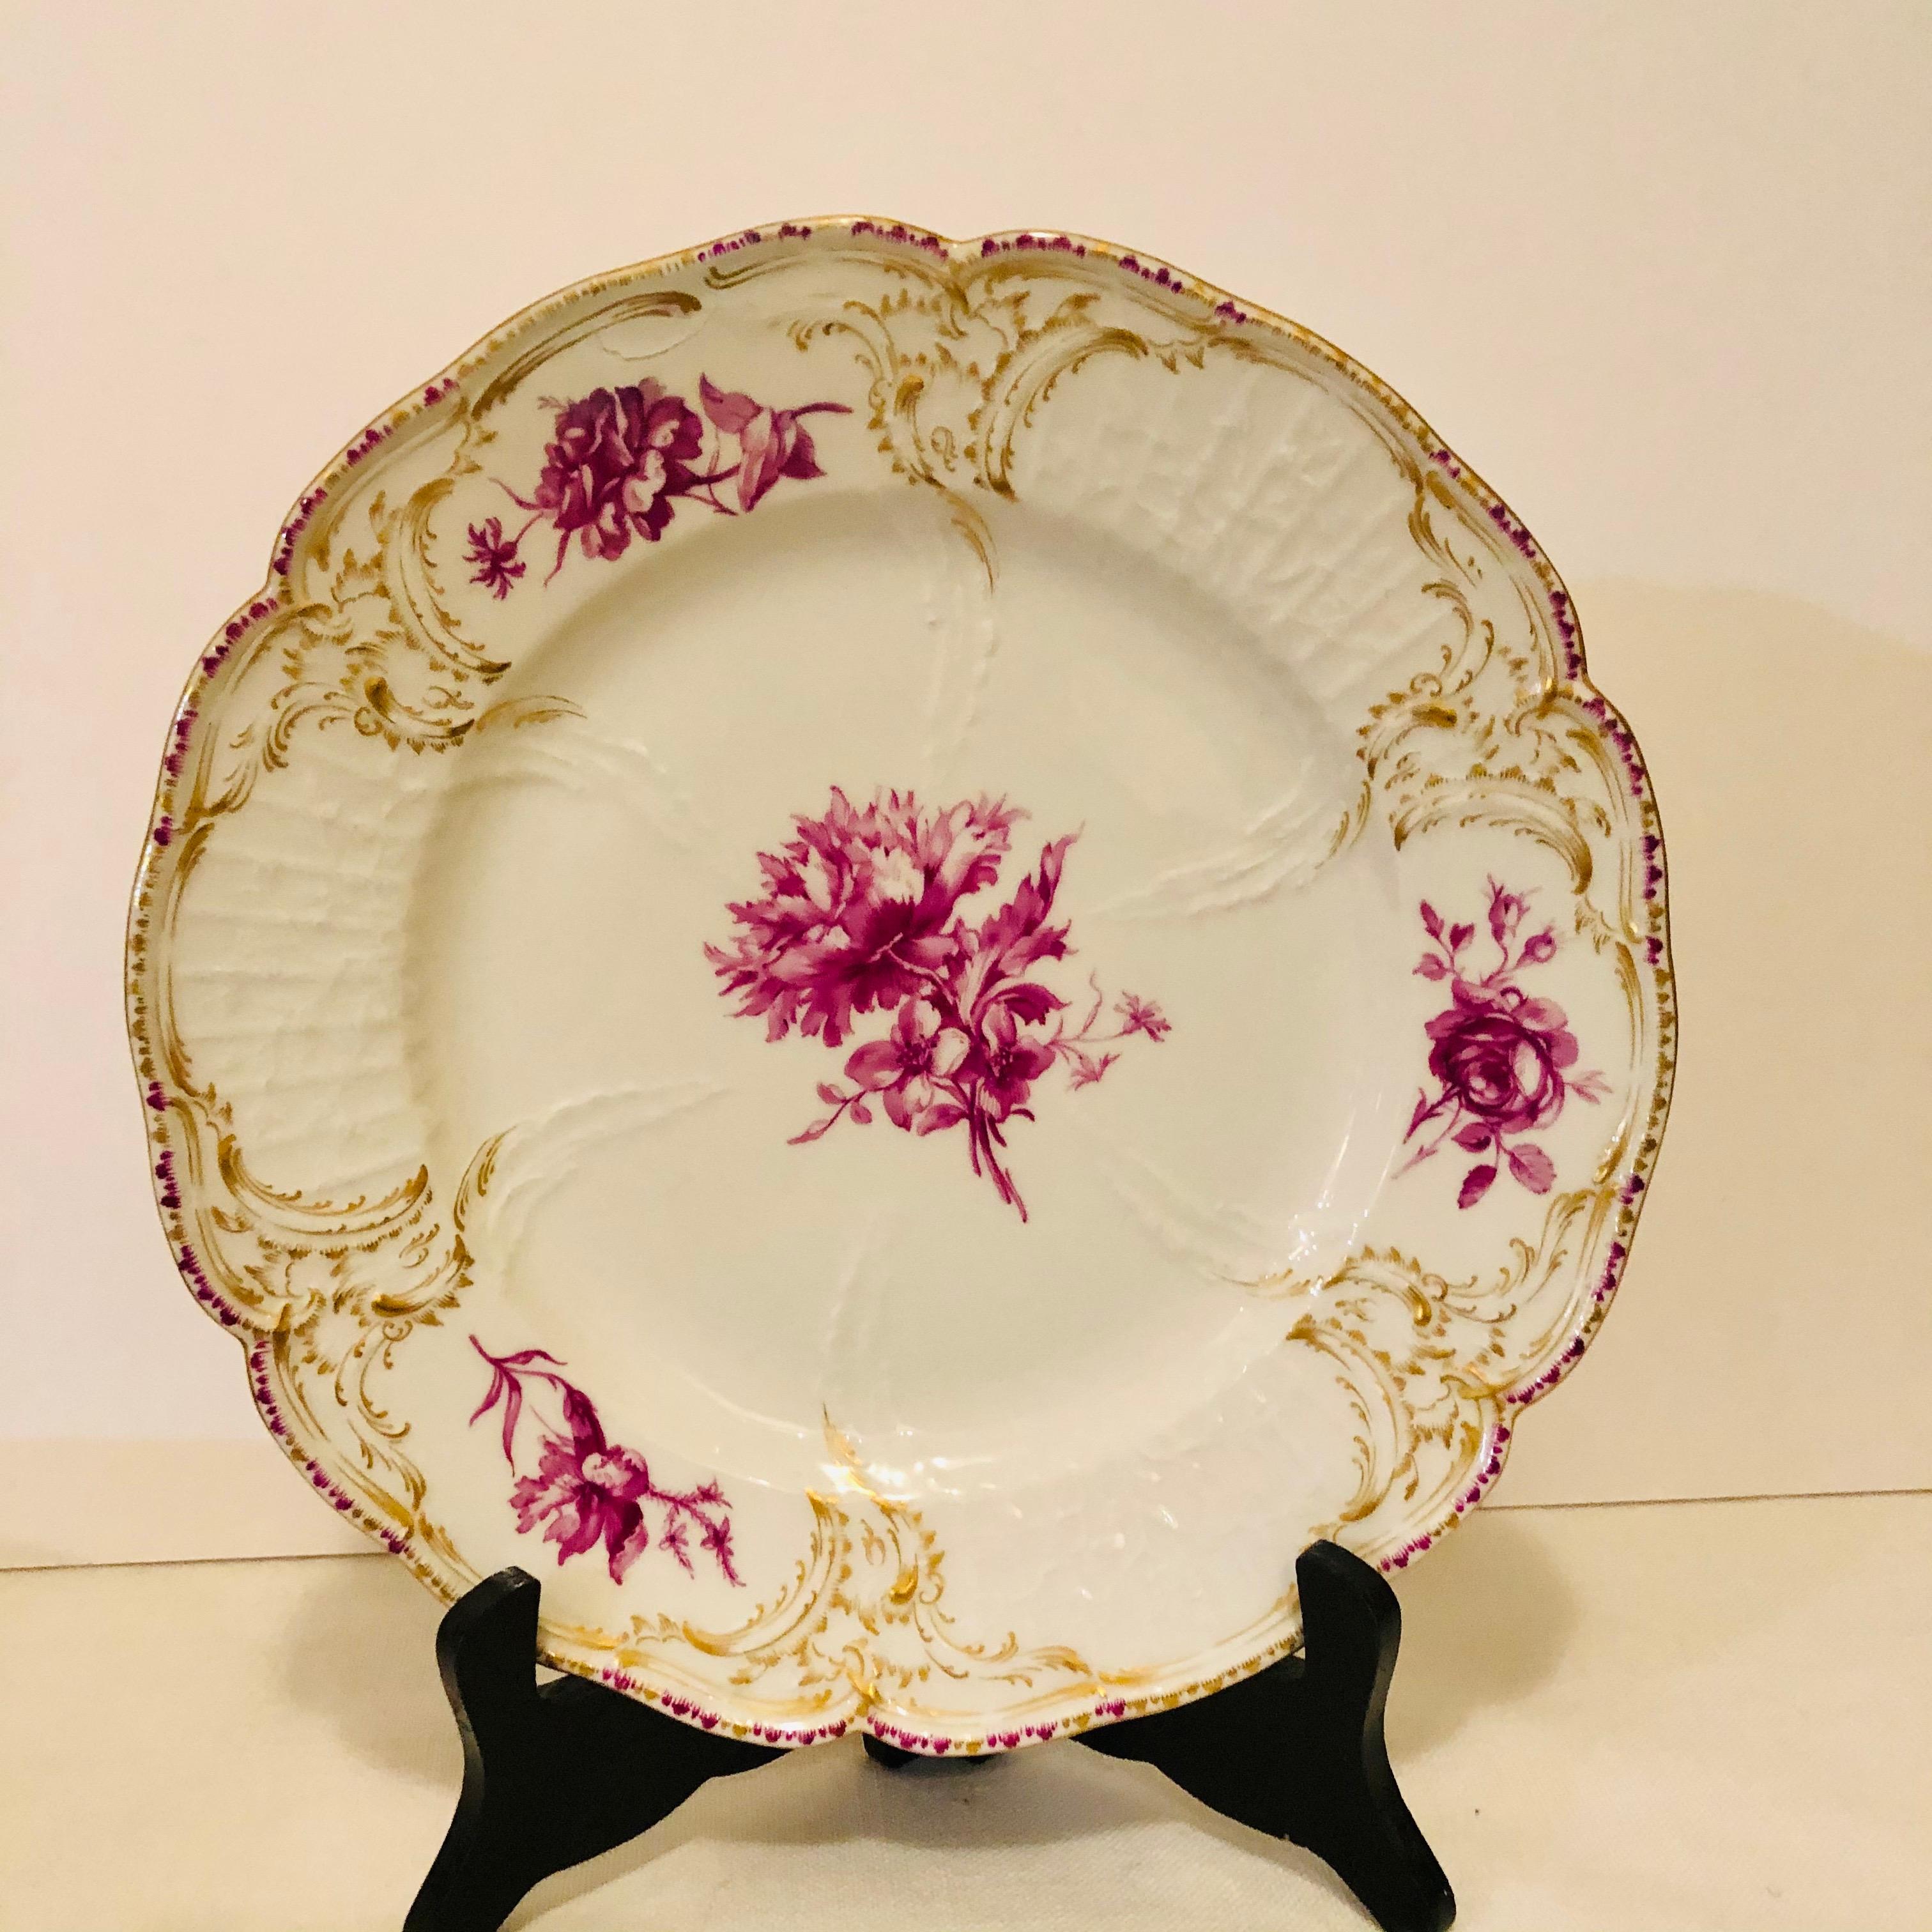 Twelve KPM Dinner Plates Each Painted with a Different Puce Flower Bouquet For Sale 3